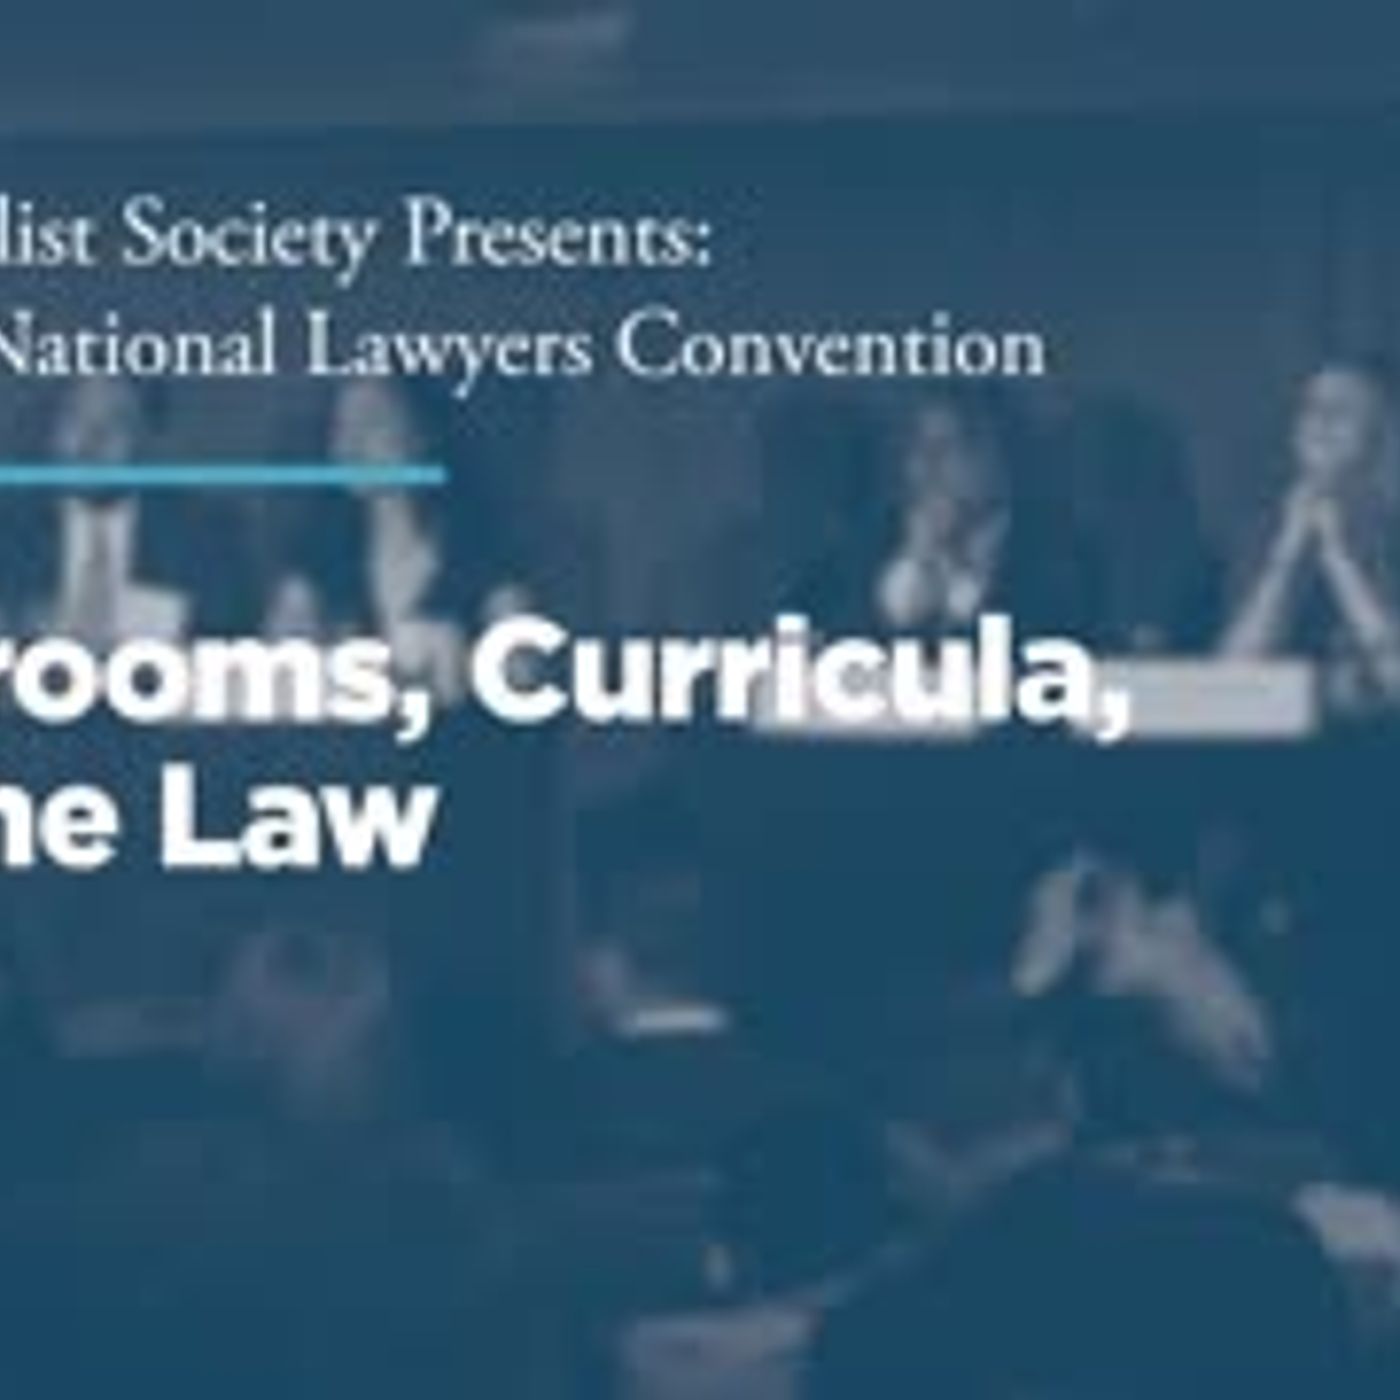 Classrooms, Curricula, and the Law